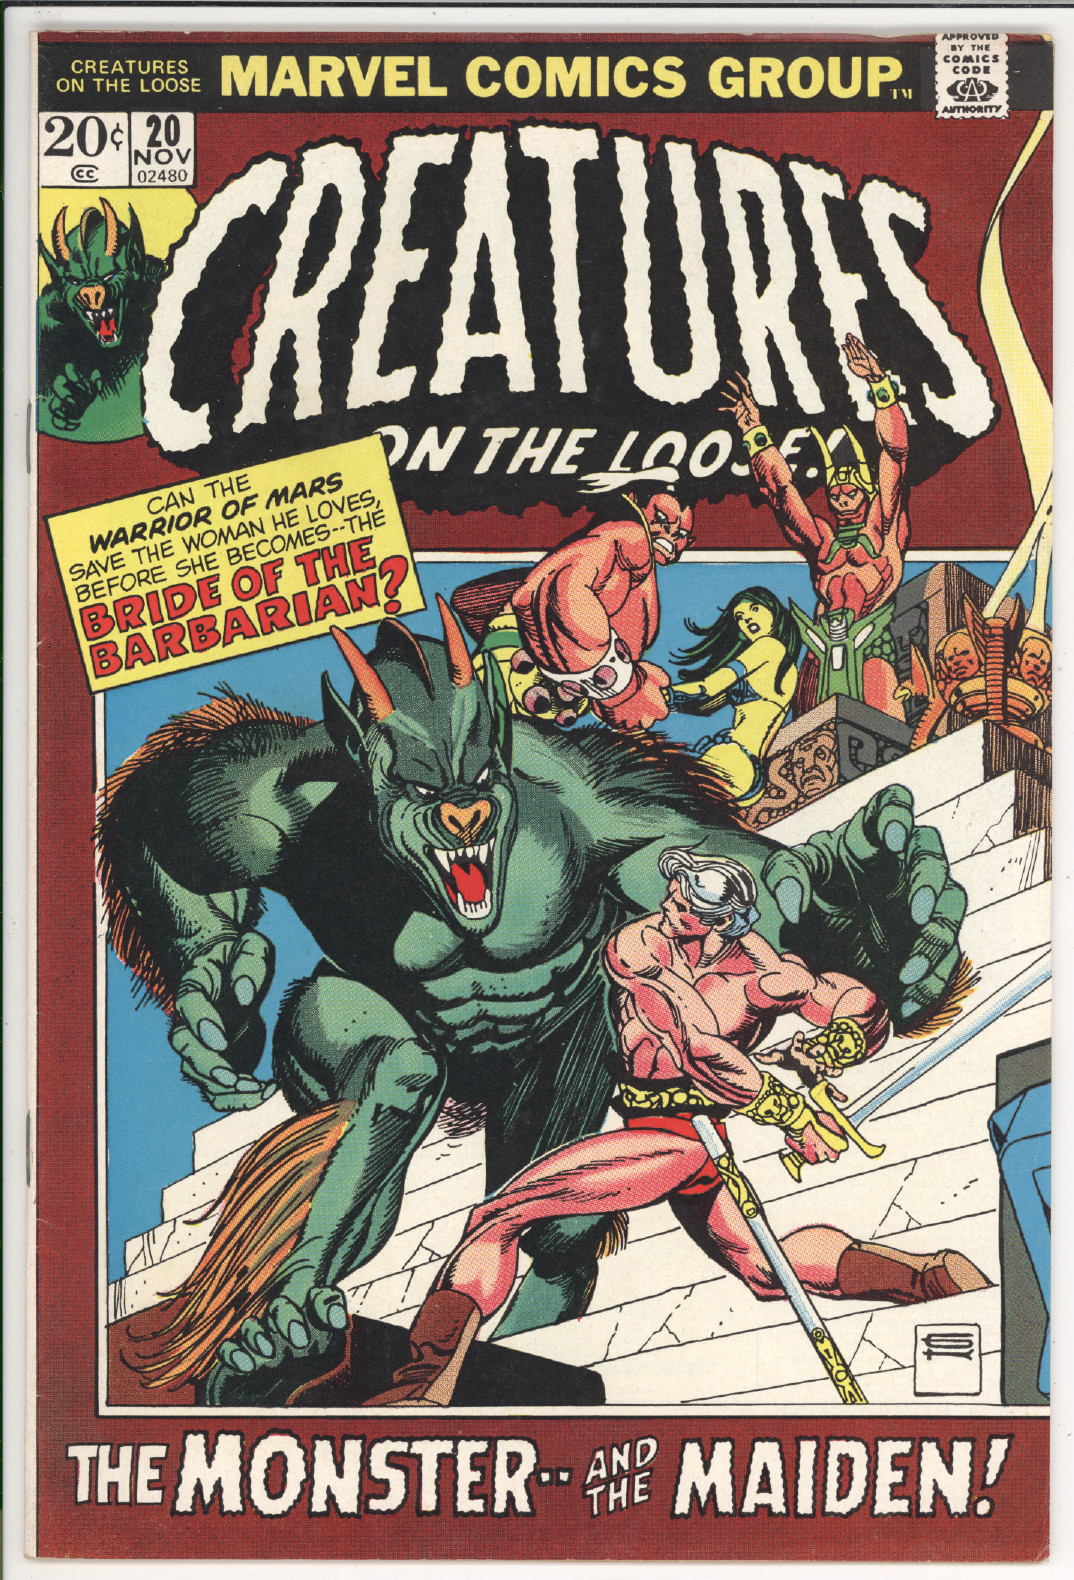 Creatures on the Loose #20 front